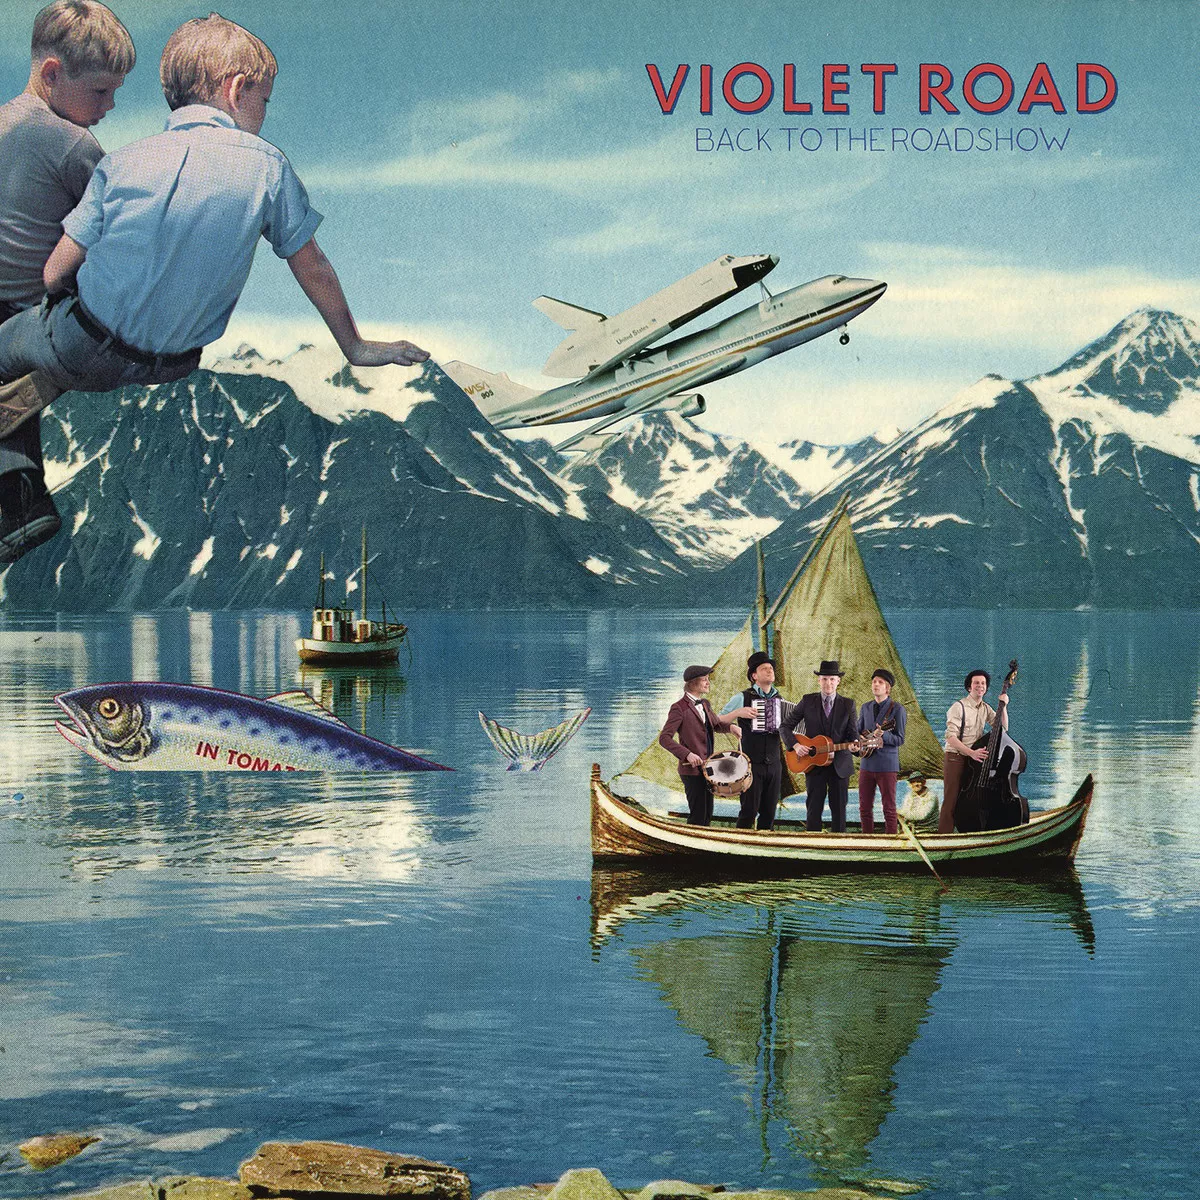 Back to the Roadshow - Violet Road